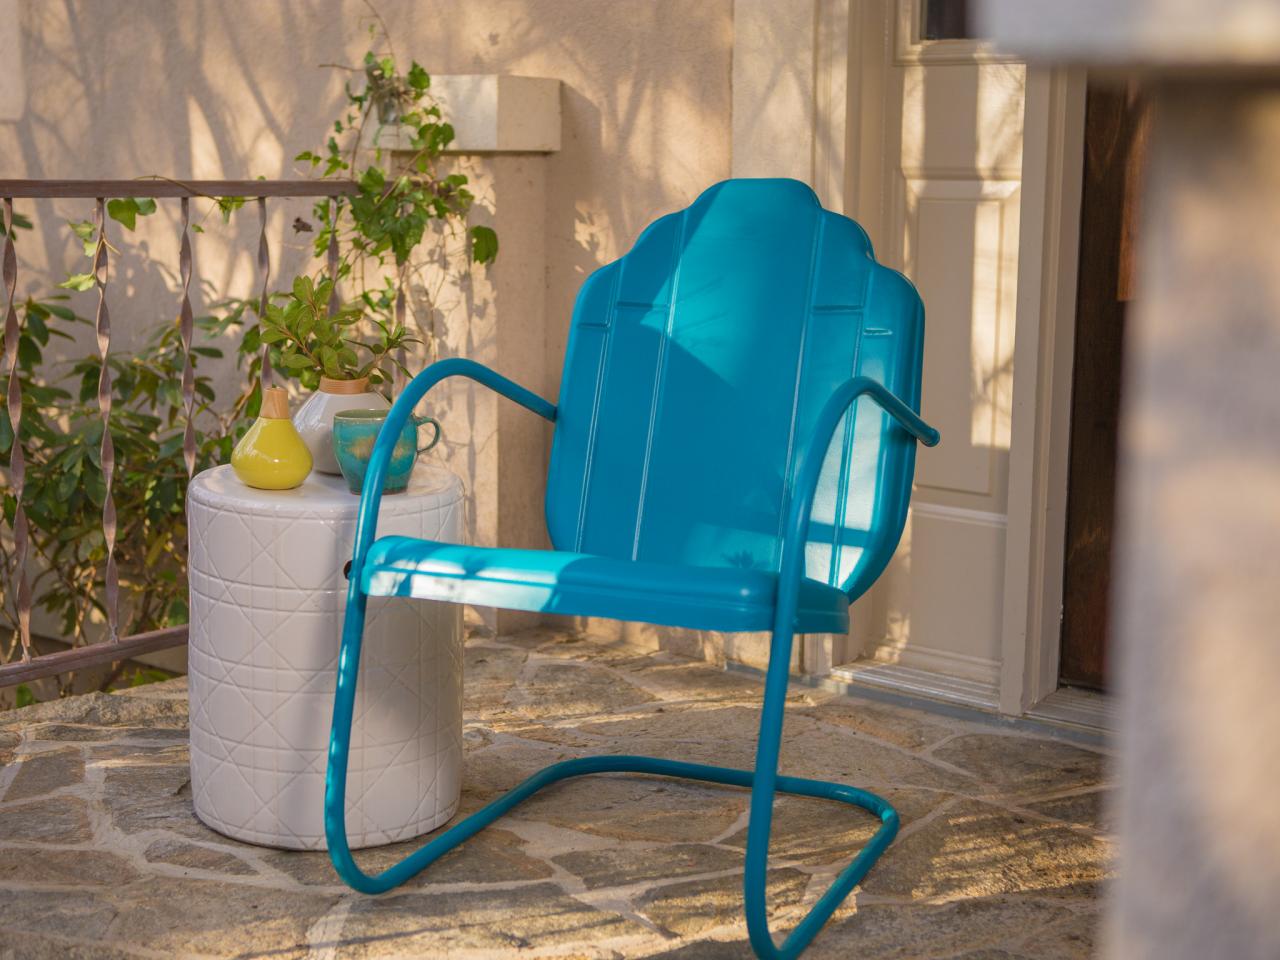 How To Paint An Outdoor Metal Chair, How Do You Remove Paint From Metal Garden Furniture